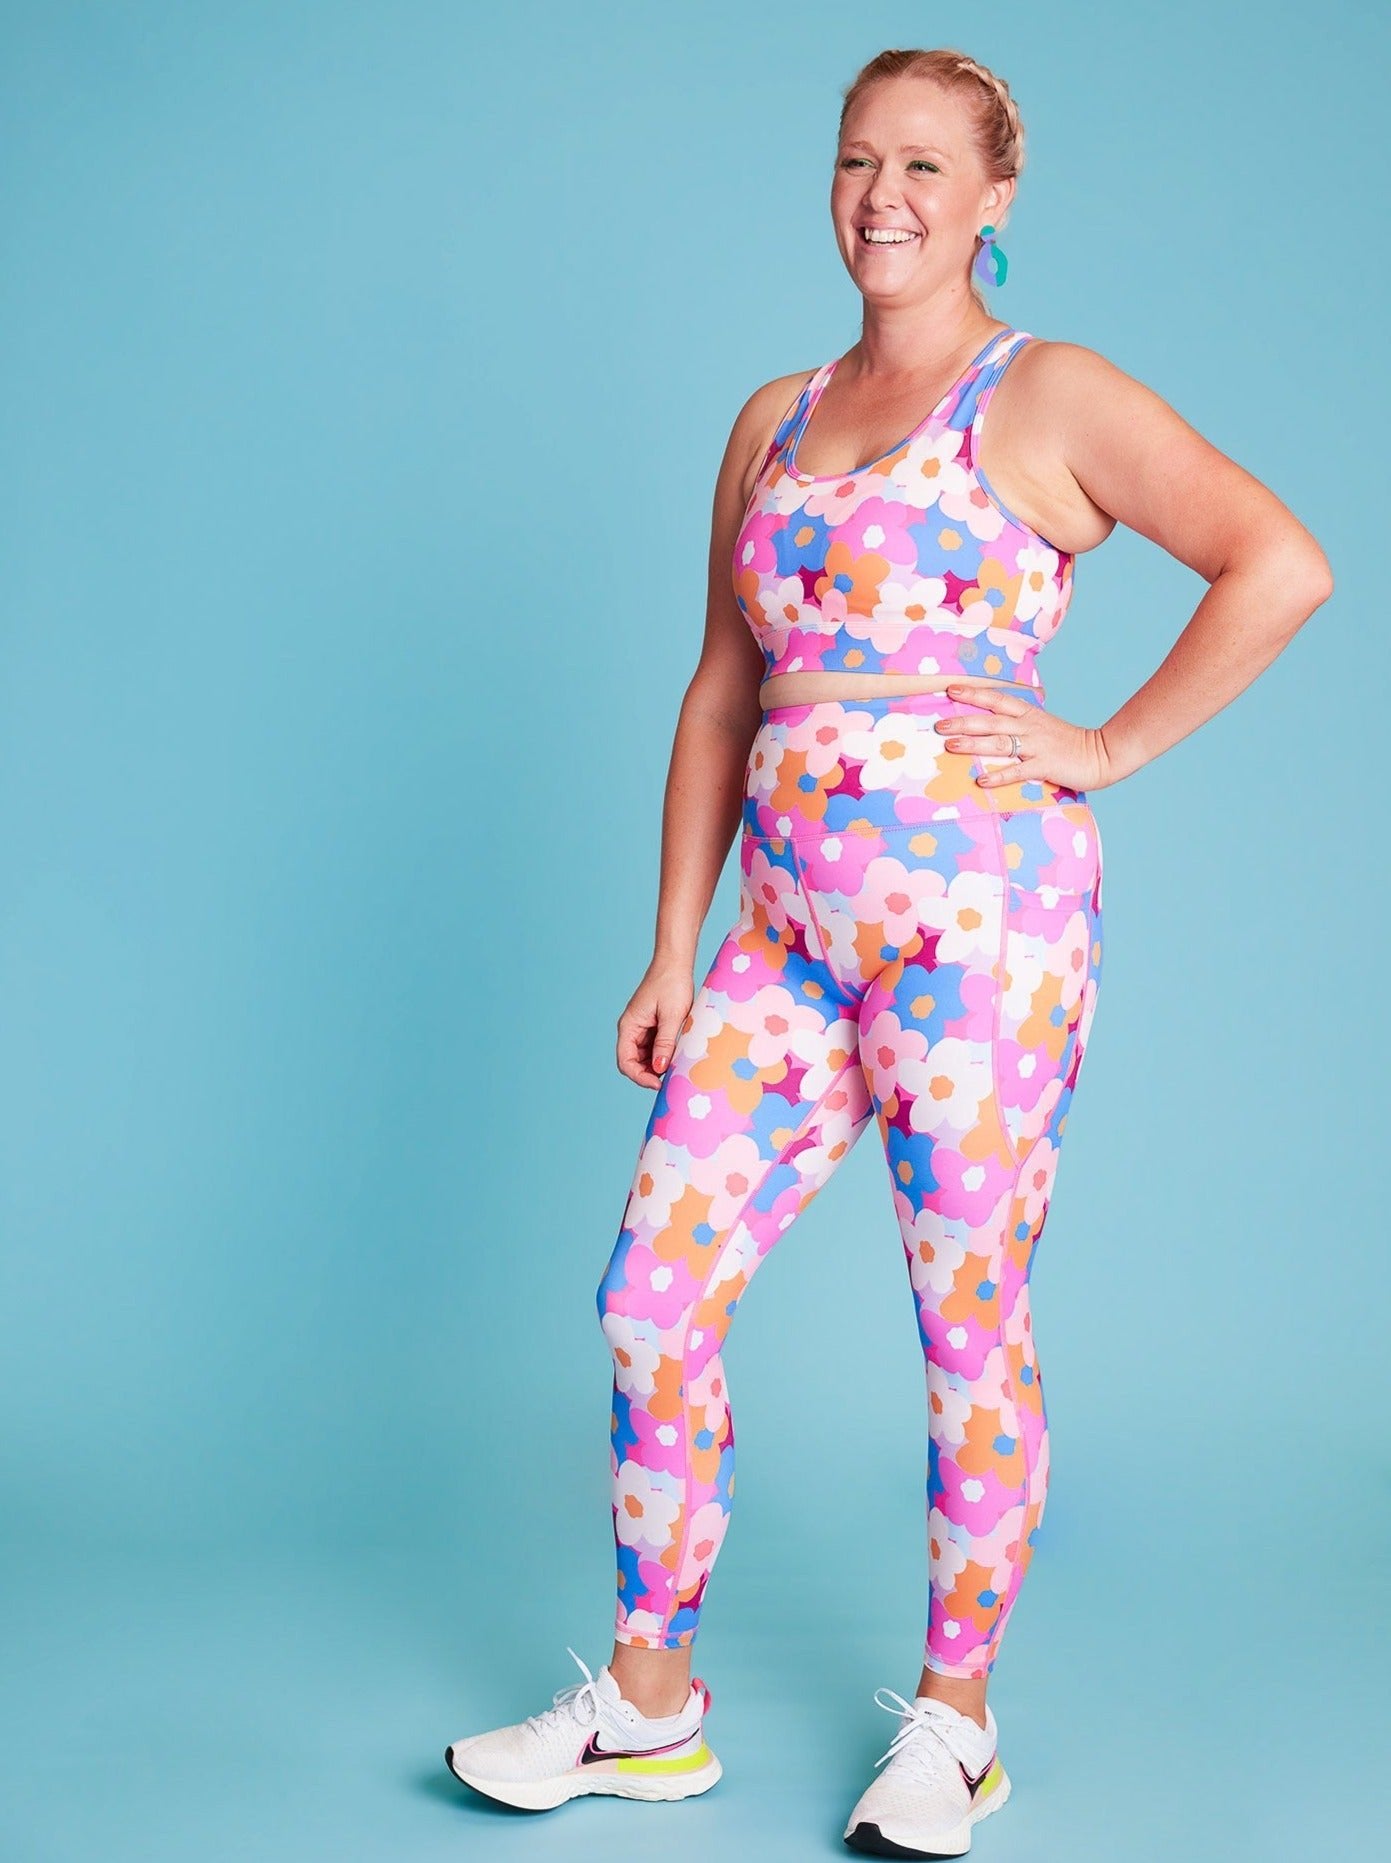 Hello Bloomer Everyday Legging - 7/8 length - high waisted floral leggings with pockets tall women